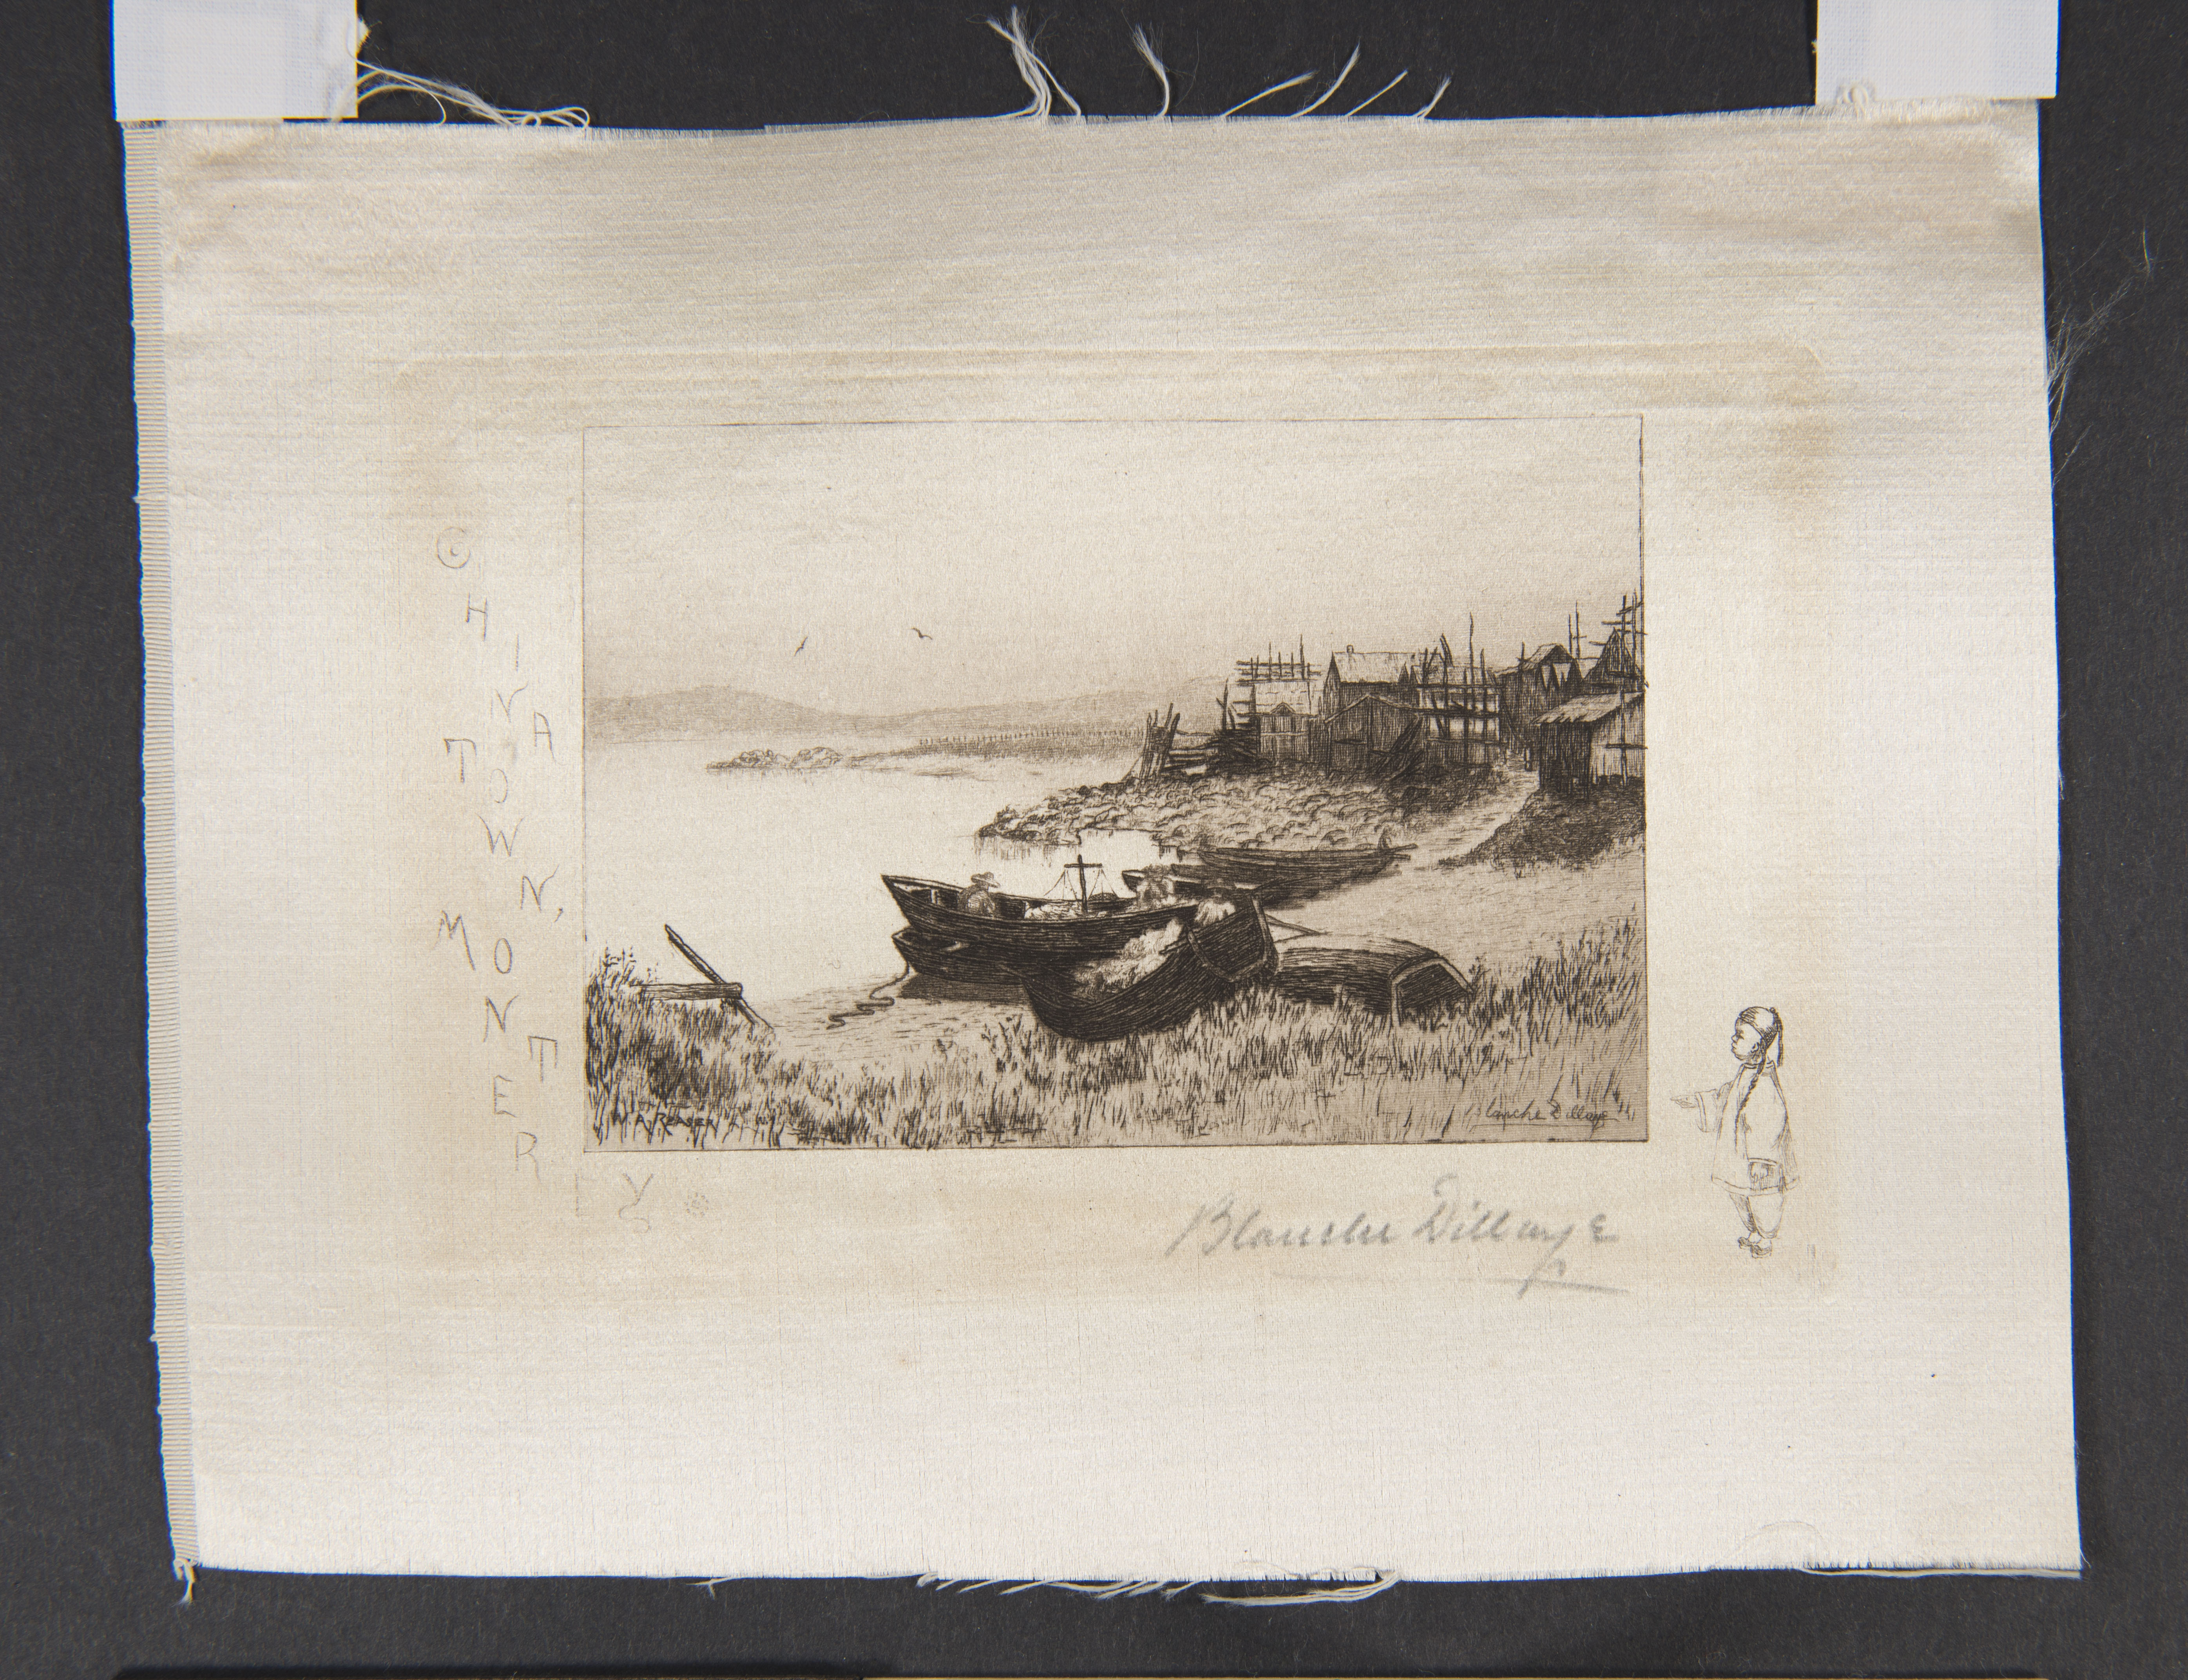 etching of some row boats sitting on a small beach with buildings in the background